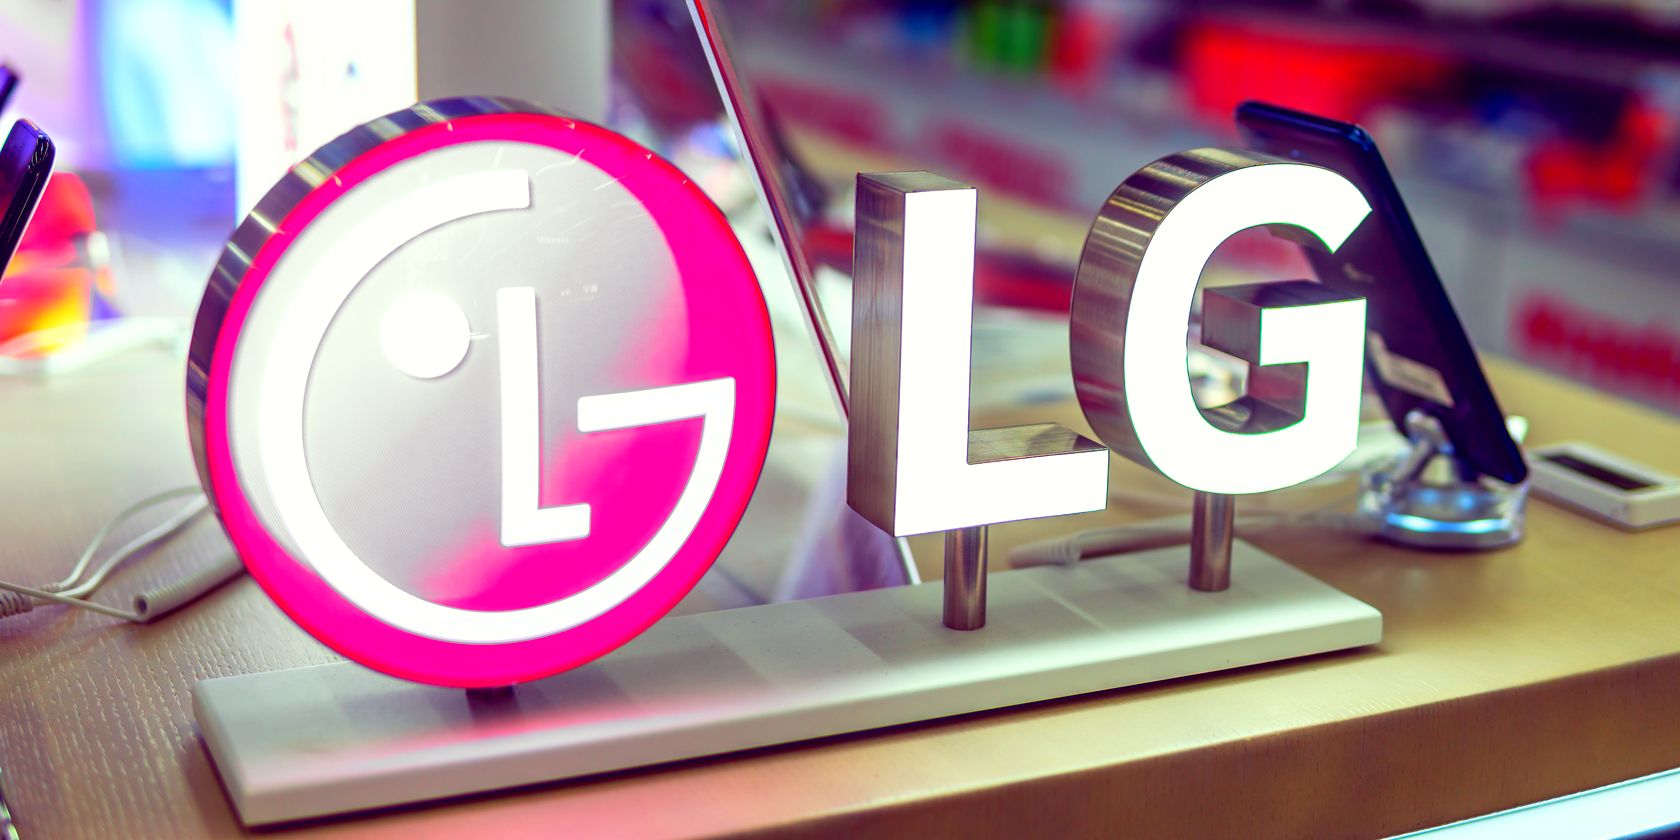 LG logo feature